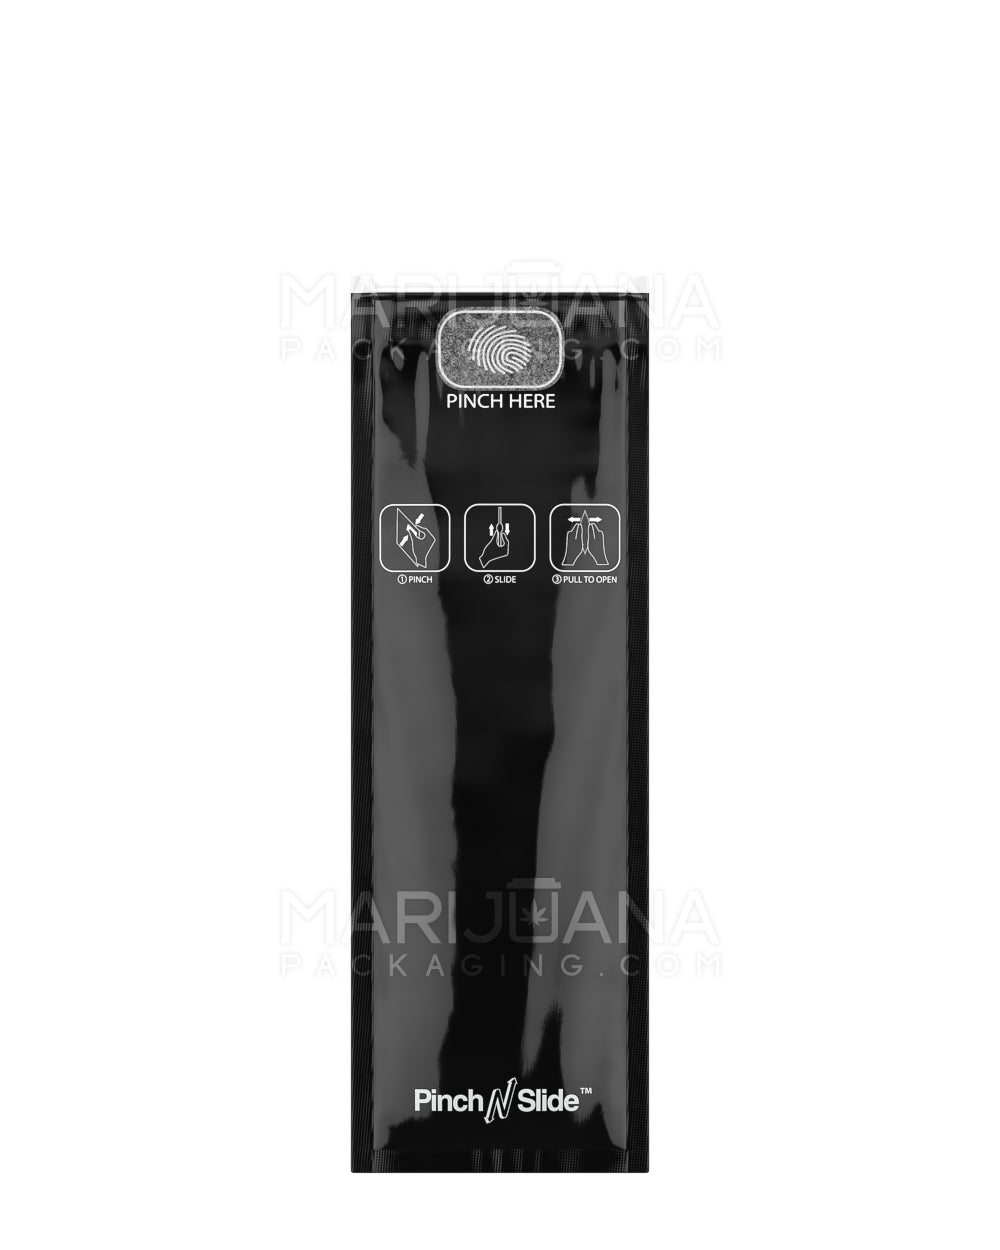 Child Resistant | Pinch N Slide ASTM Glossy Black Mylar Bags | 2.4in x 7.2in - 2.5g - 250 Count - 1